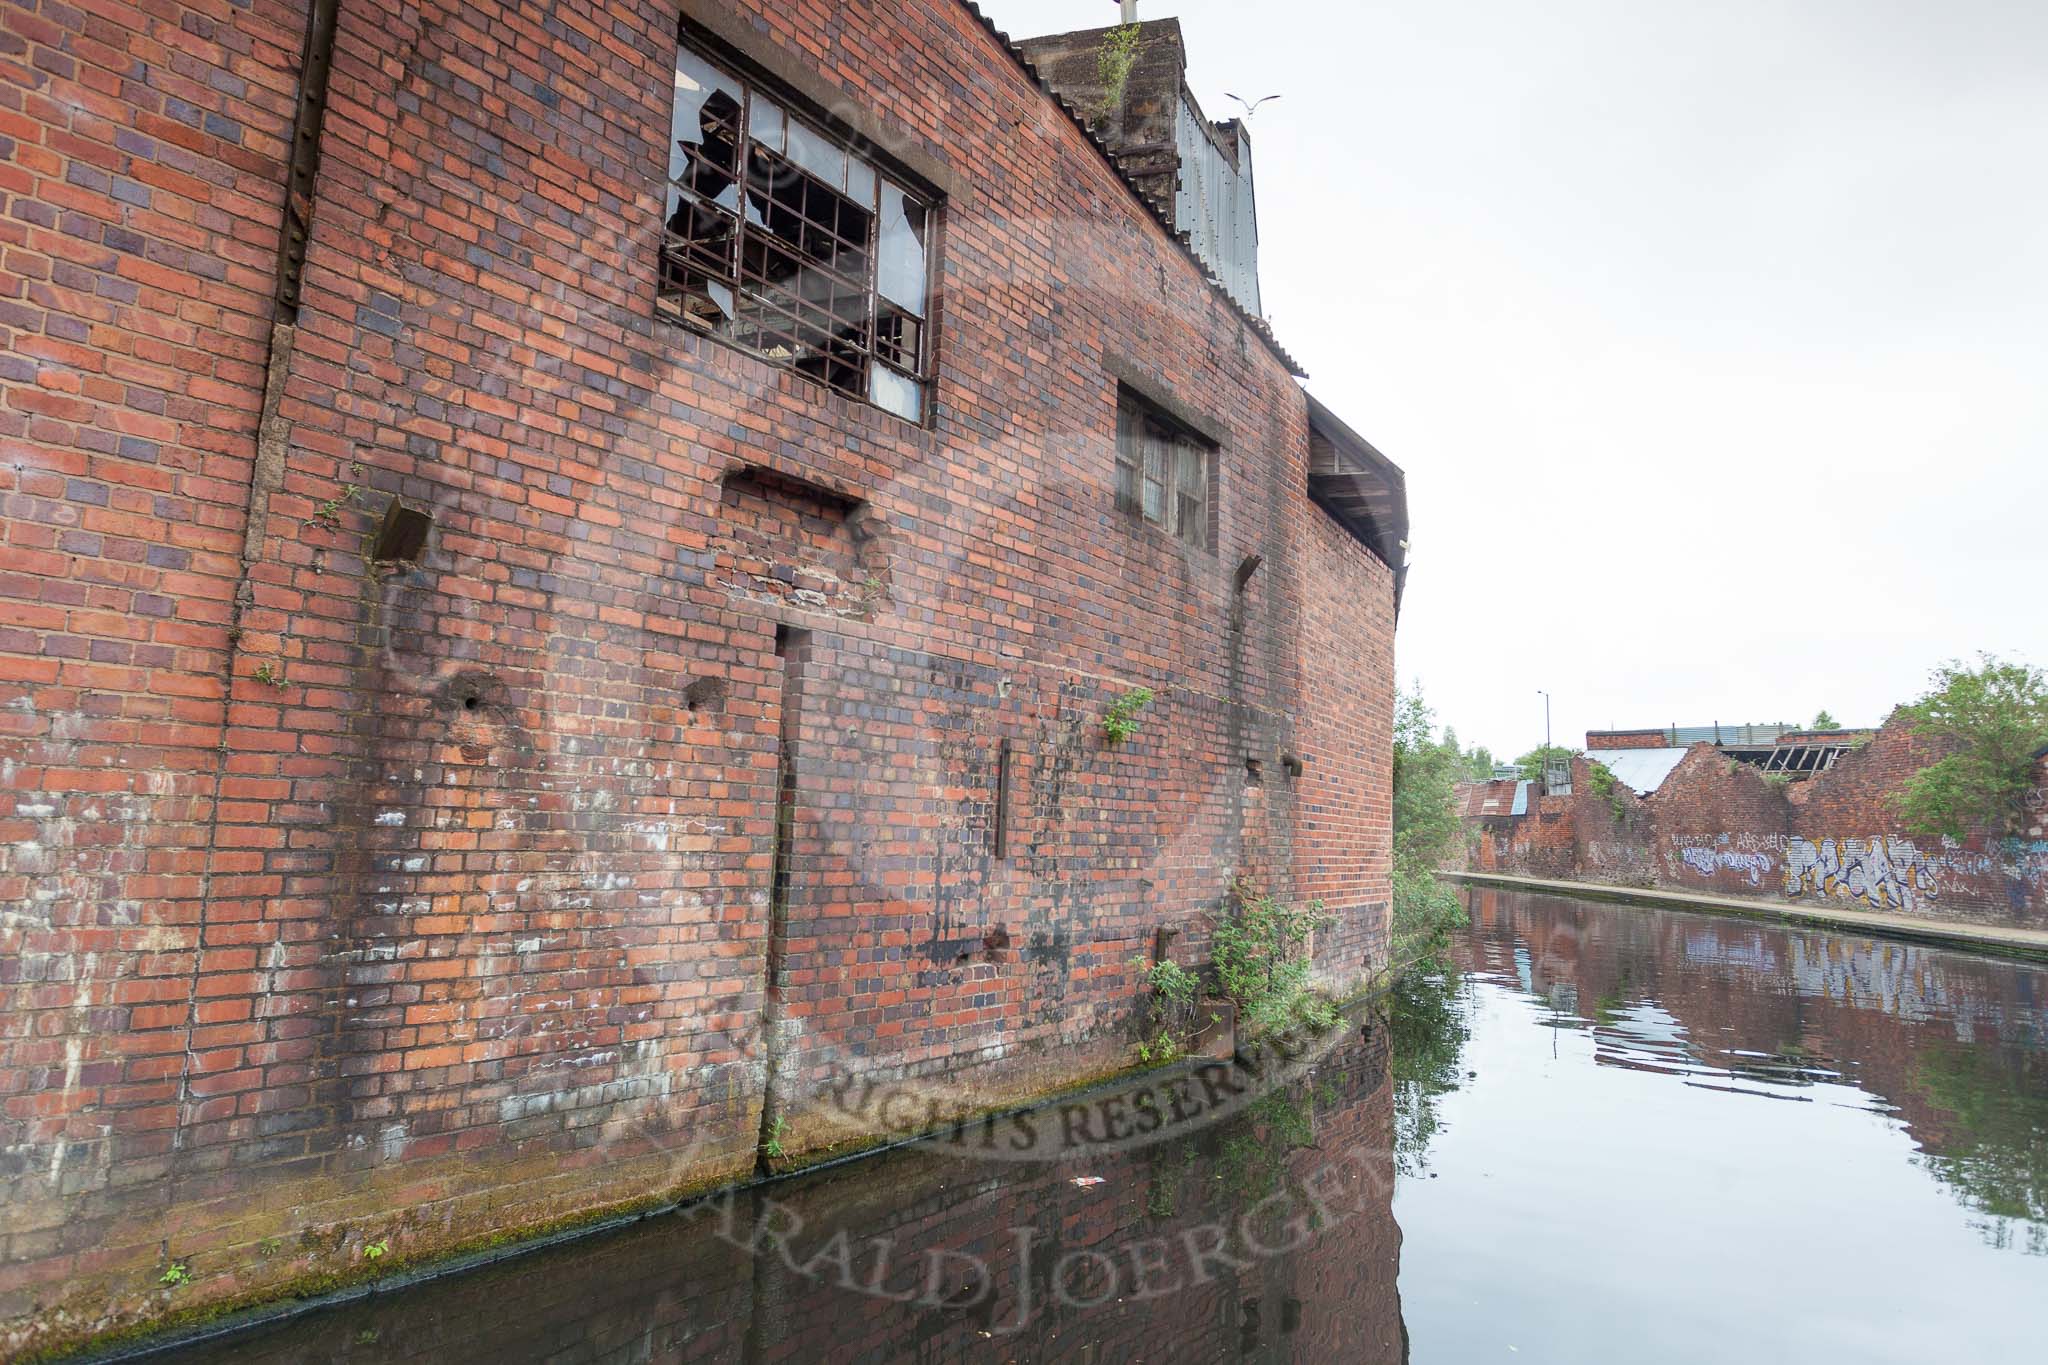 BCN 24h Marathon Challenge 2015: Old industry at the Soho Loop. In a few years or decades this will be history, and replaced by housing developments or a business park, probably with less character than the old industry.
Birmingham Canal Navigations,



on 23 May 2015 at 09:00, image #27